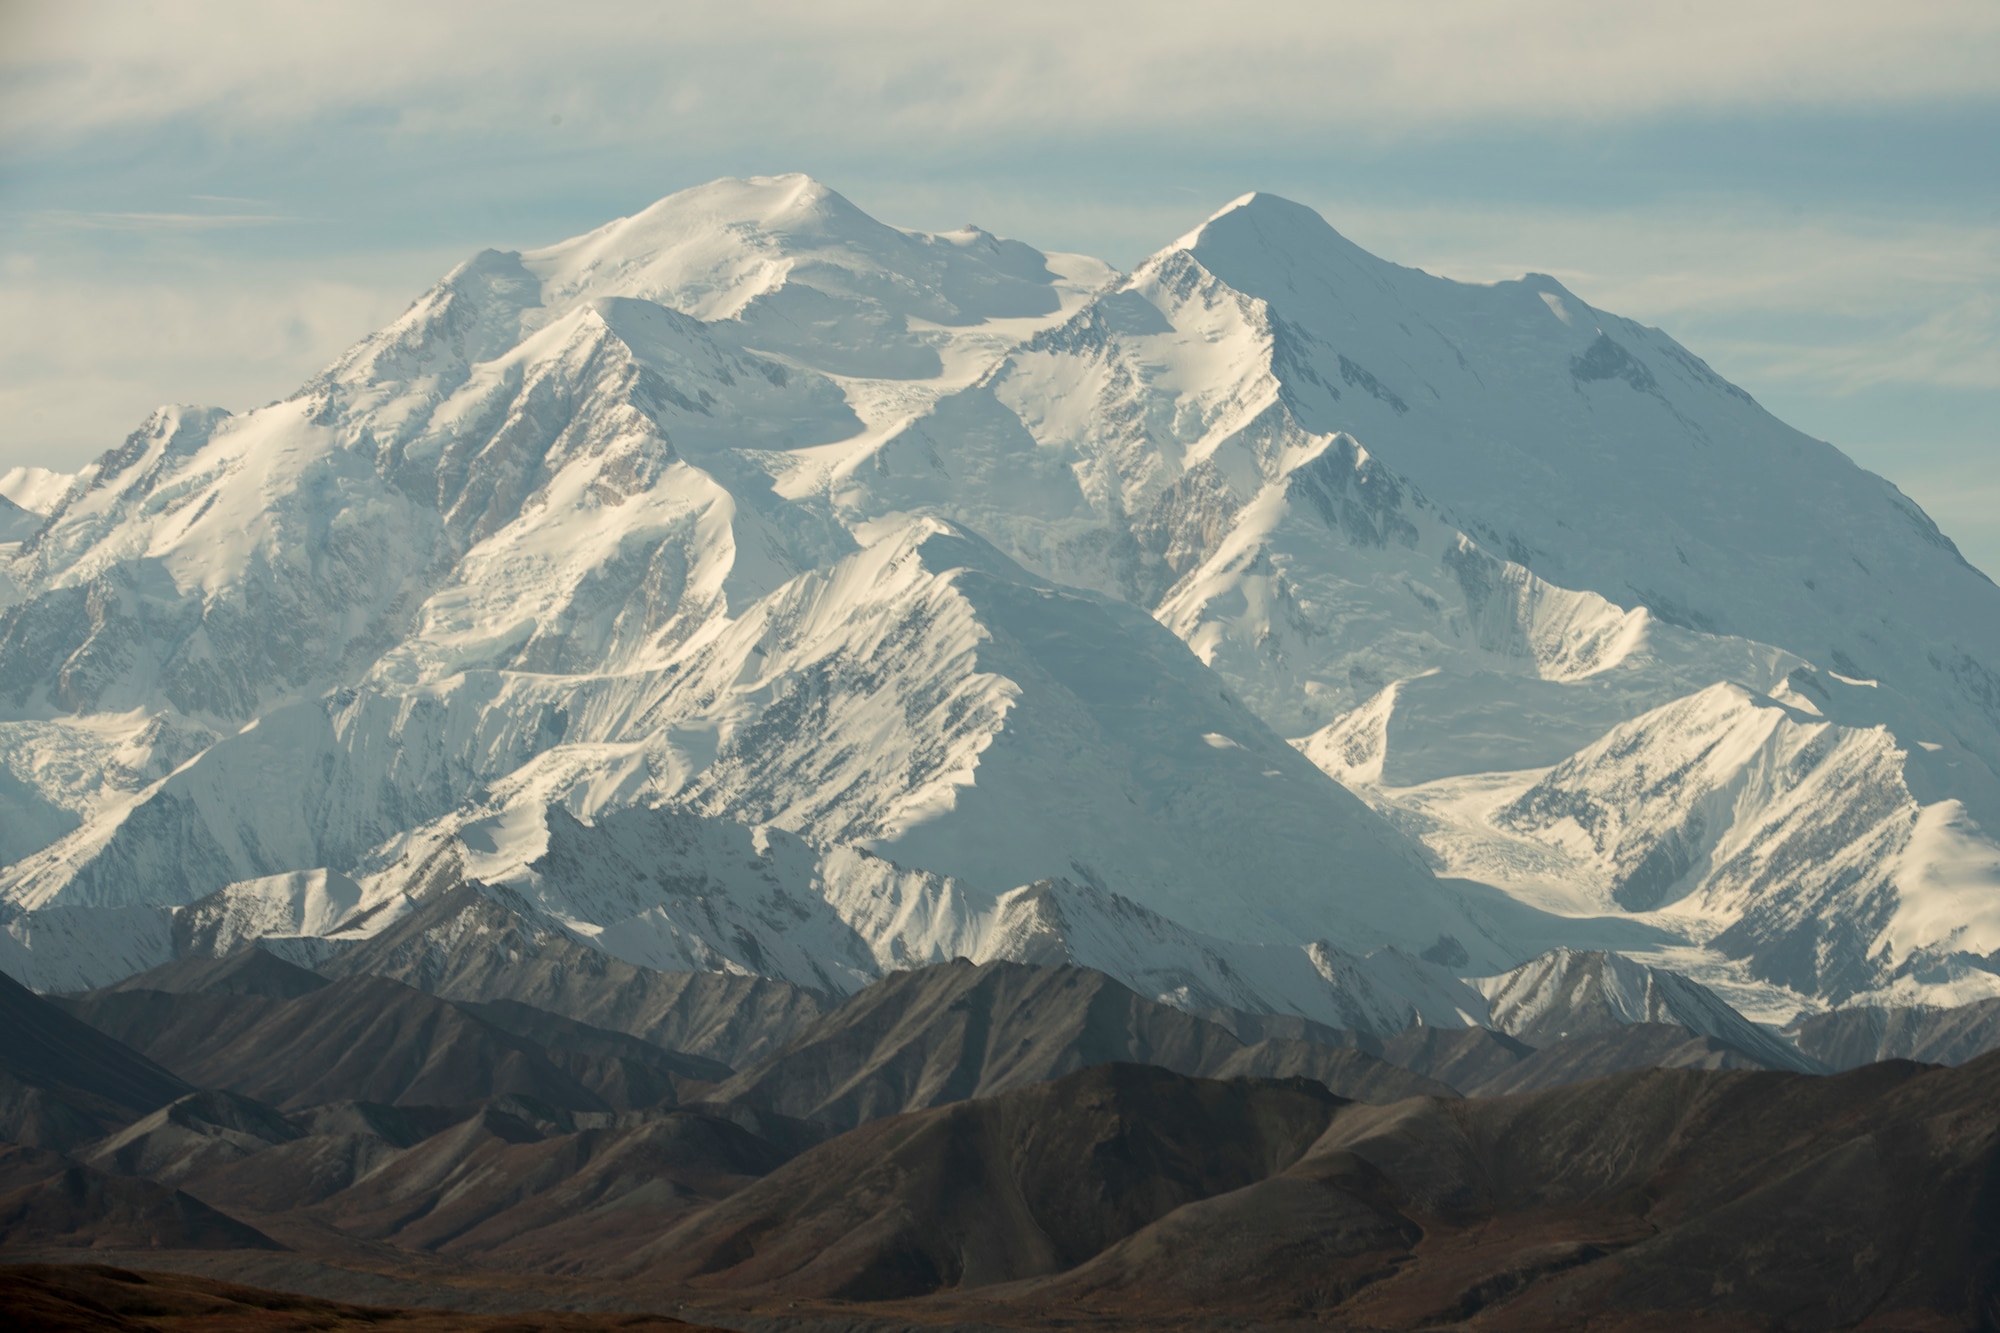 Service members view of Denali from Eielson Visitor’s Center during Military Appreciation Day at Mile 66, Denali National Park and Preserve, Alaska, Sept. 15, 2018. The 11th annual Military Appreciation Day included 400 “road lottery” tickets given out to Alaska-based service members. With the warm, dry weather conditions this year, road lottery recipients were given the chance to drive out to the end of the park road at Mile 92.